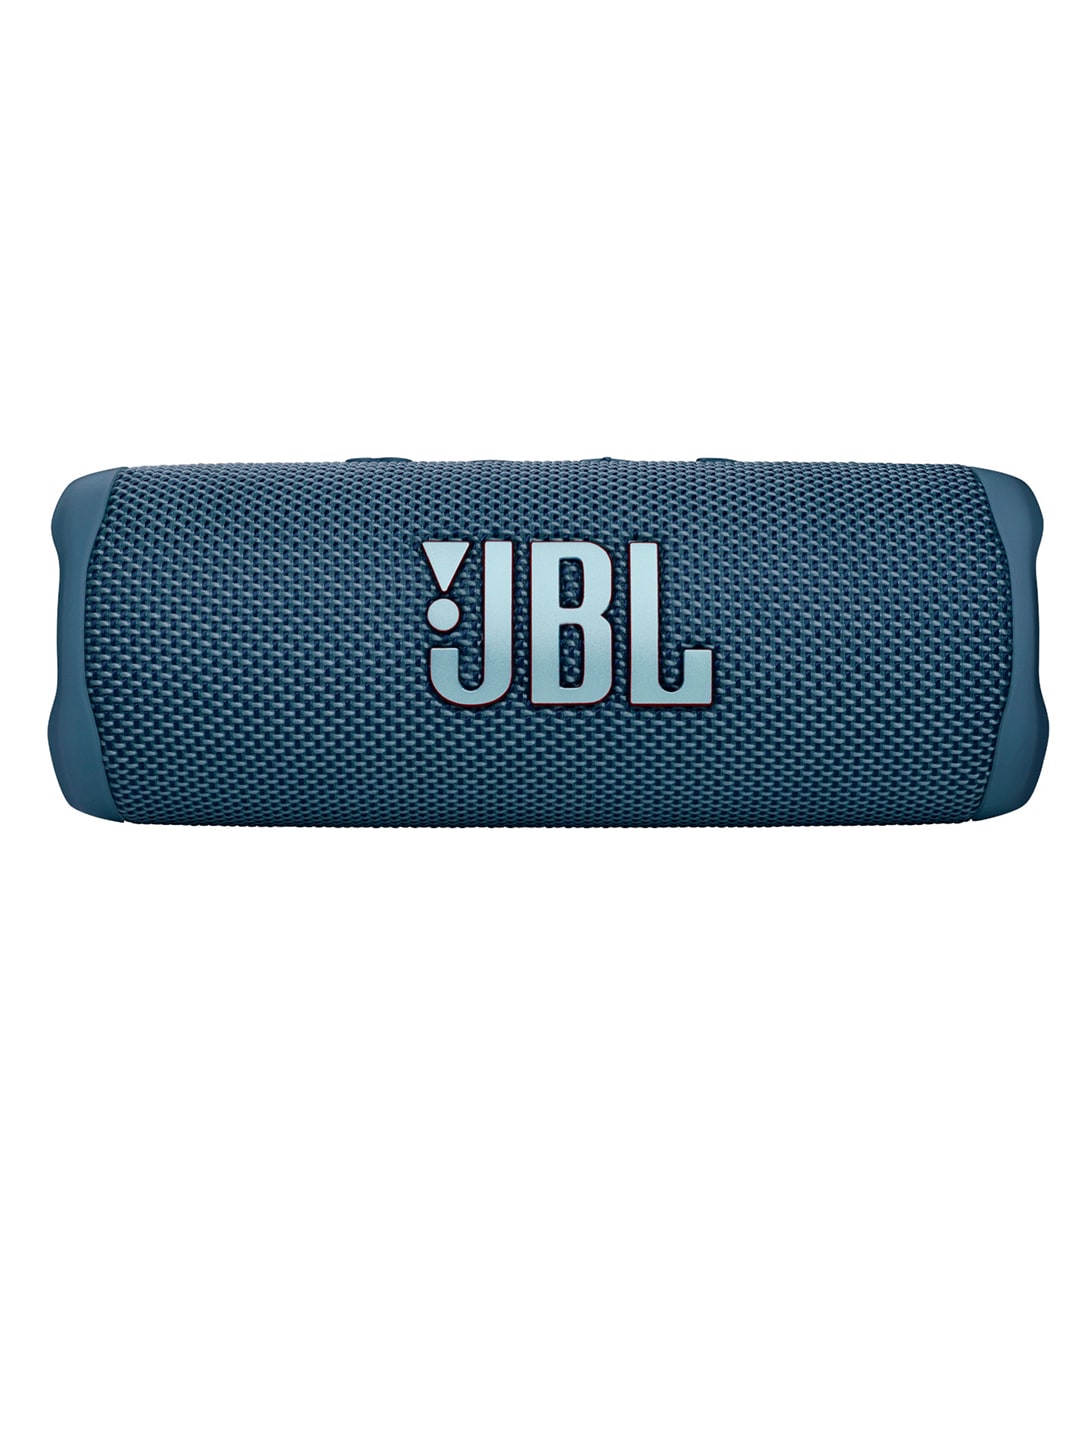 JBL Blue Flip 6 Wireless Portable Bluetooth Speaker Without Mic Price in India